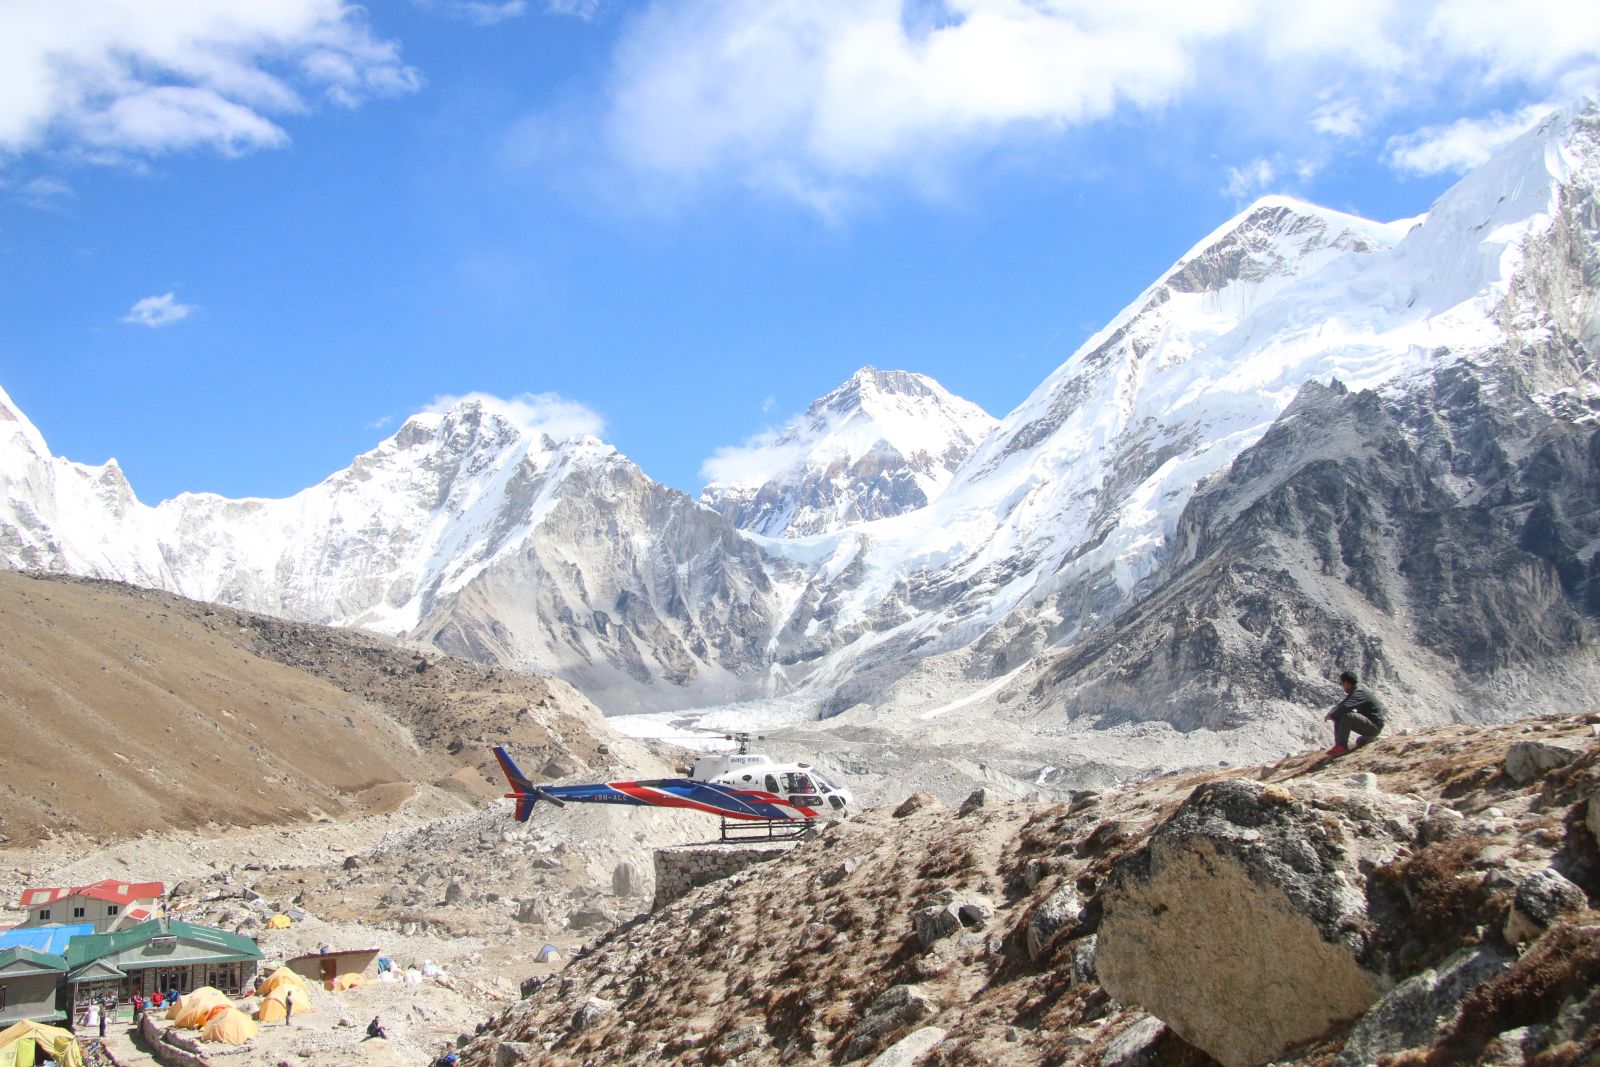 A perfect itinerary brings chance to enjoy views like this on the Everest base camp trek